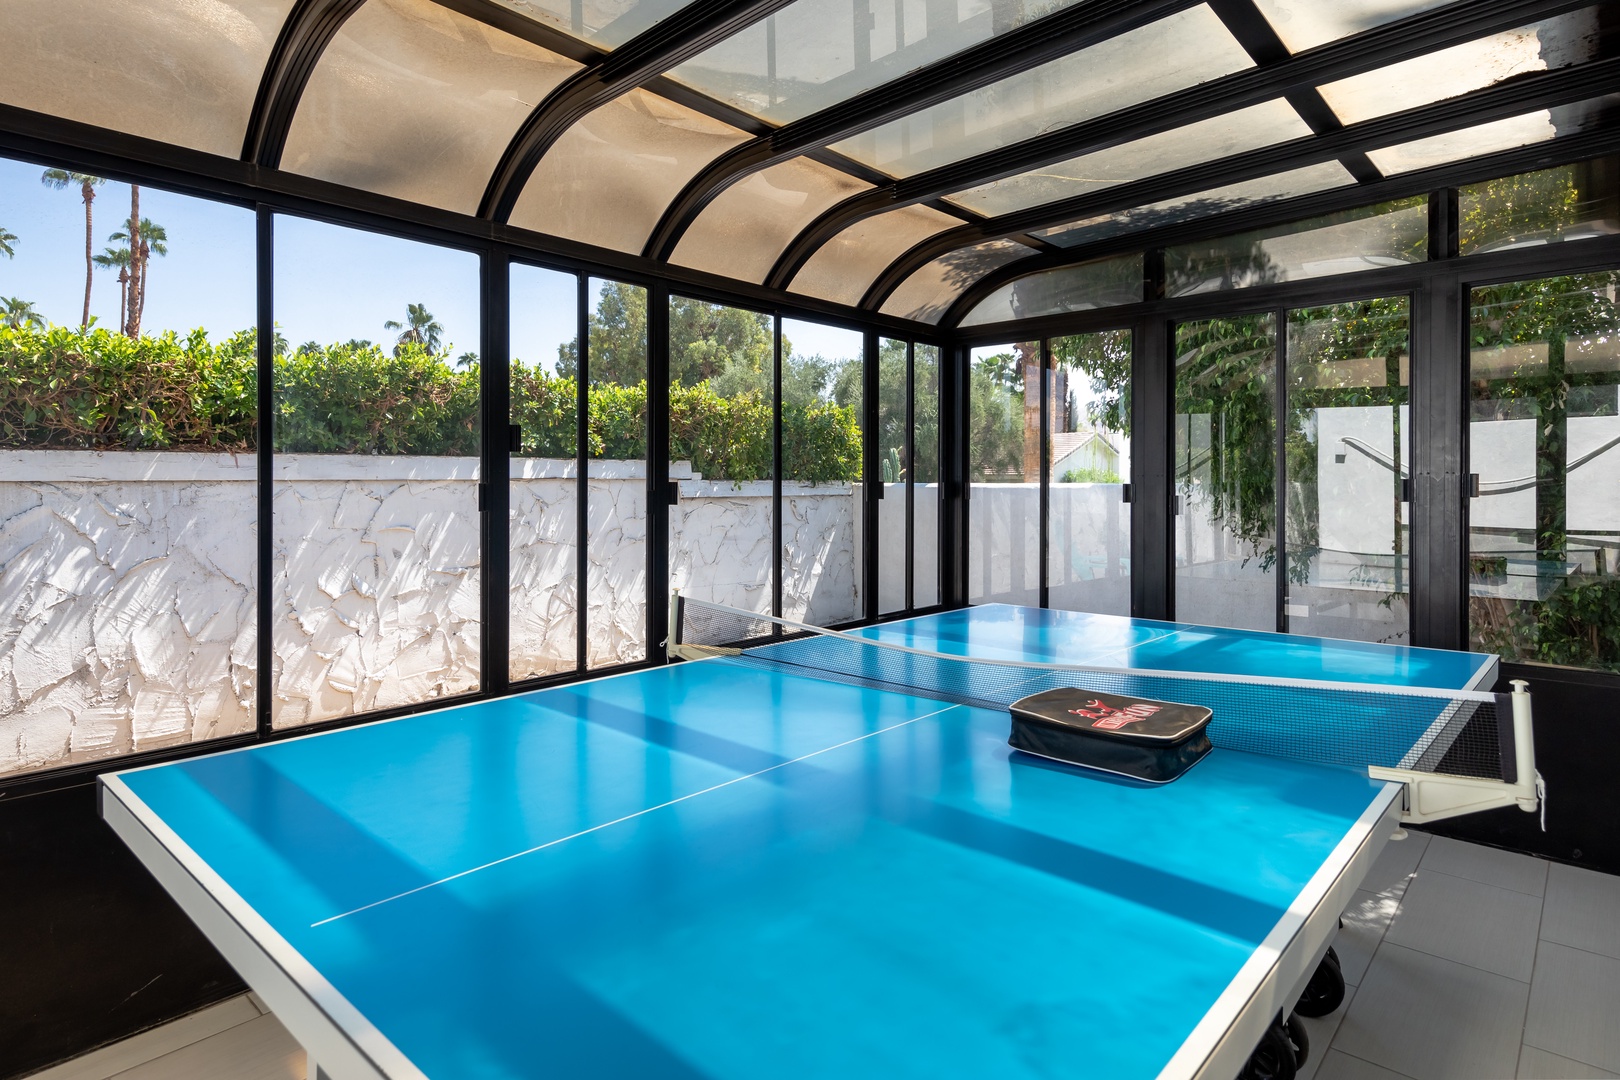 Ping pong in the sun room, anyone?